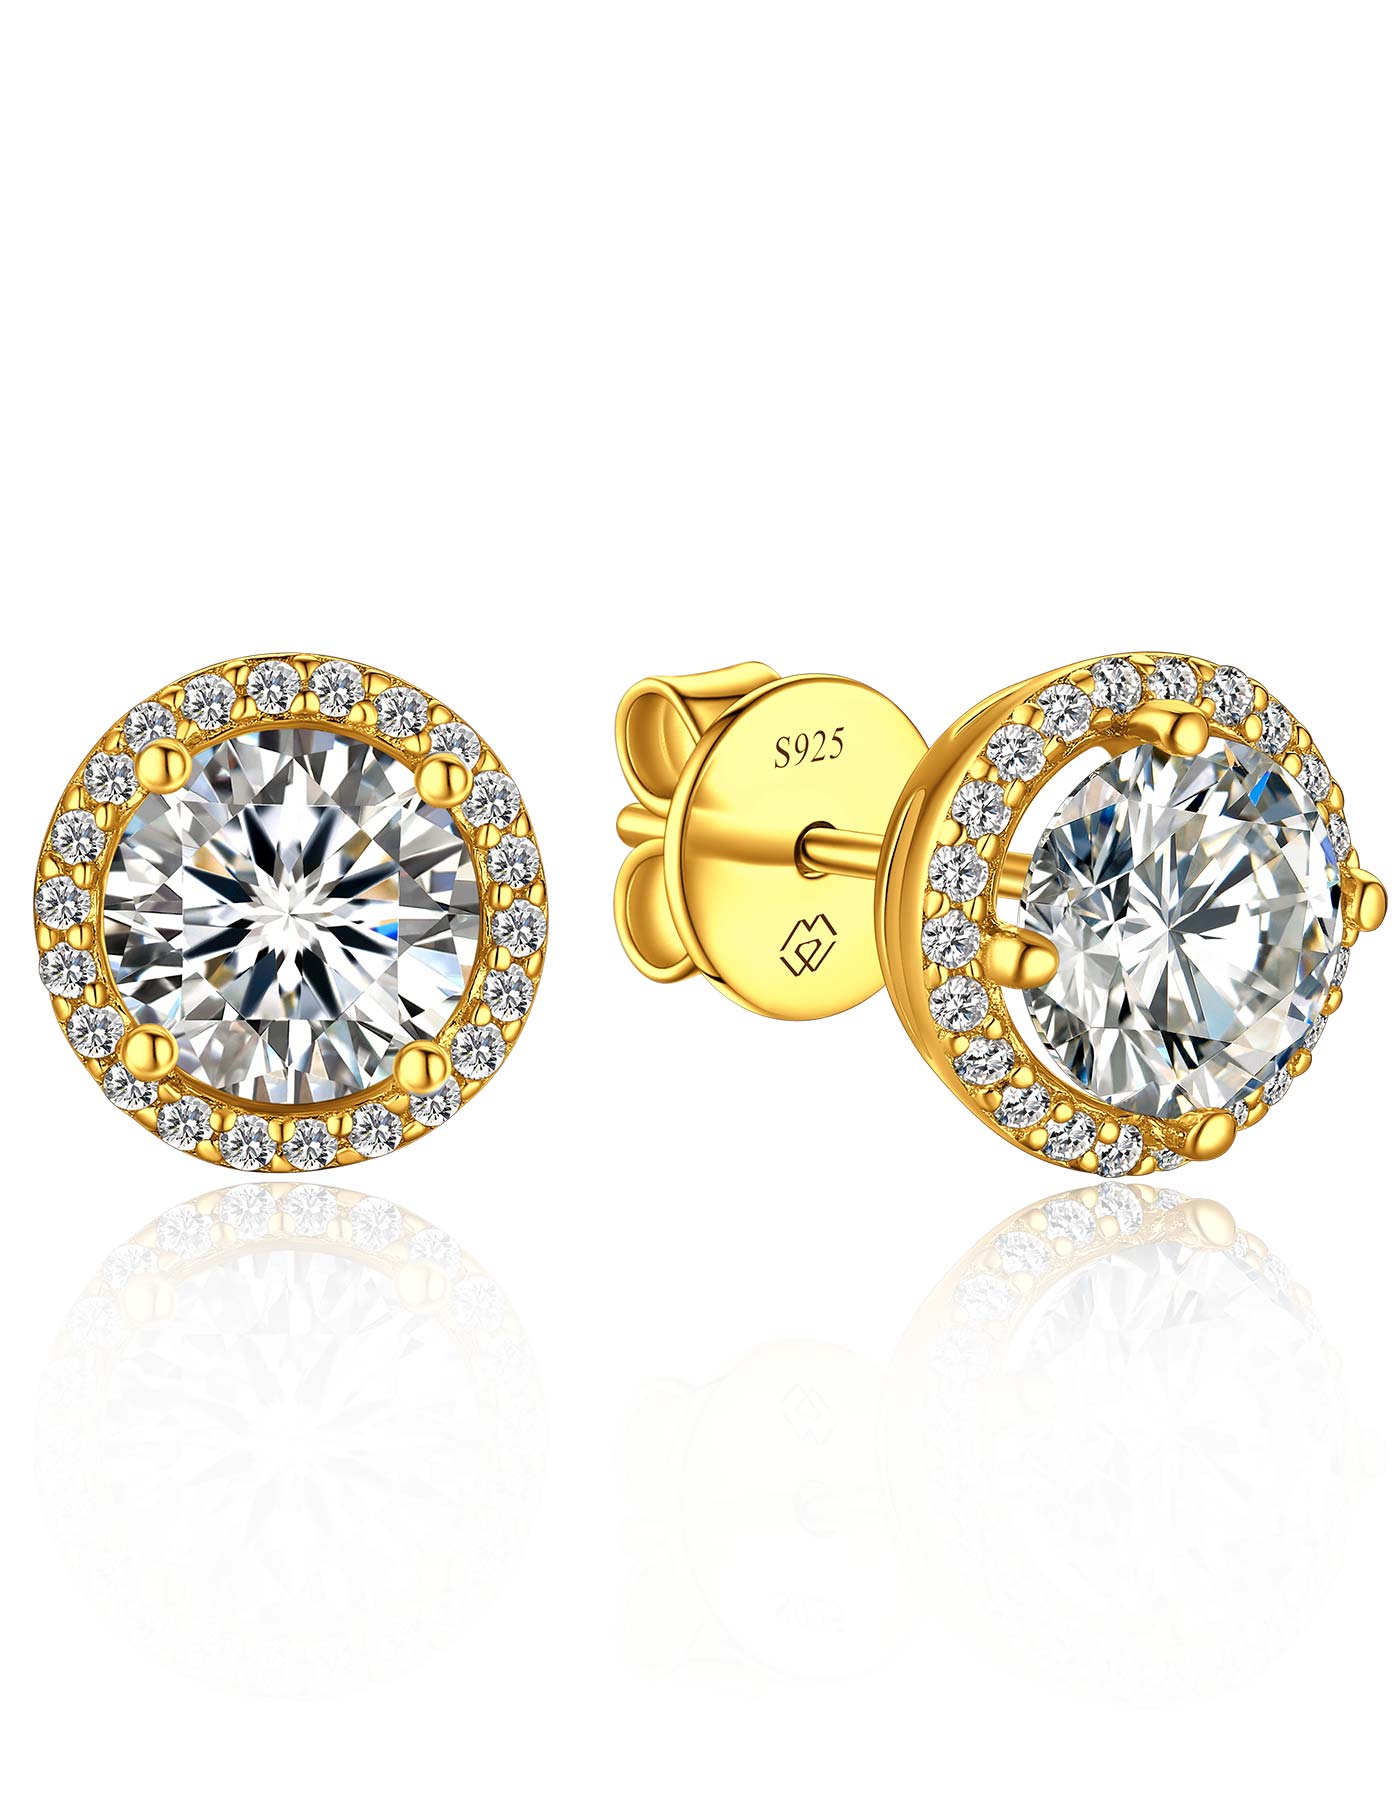 MomentWish Sterling Silver Moissanite Diamond Earrings Gold Plated